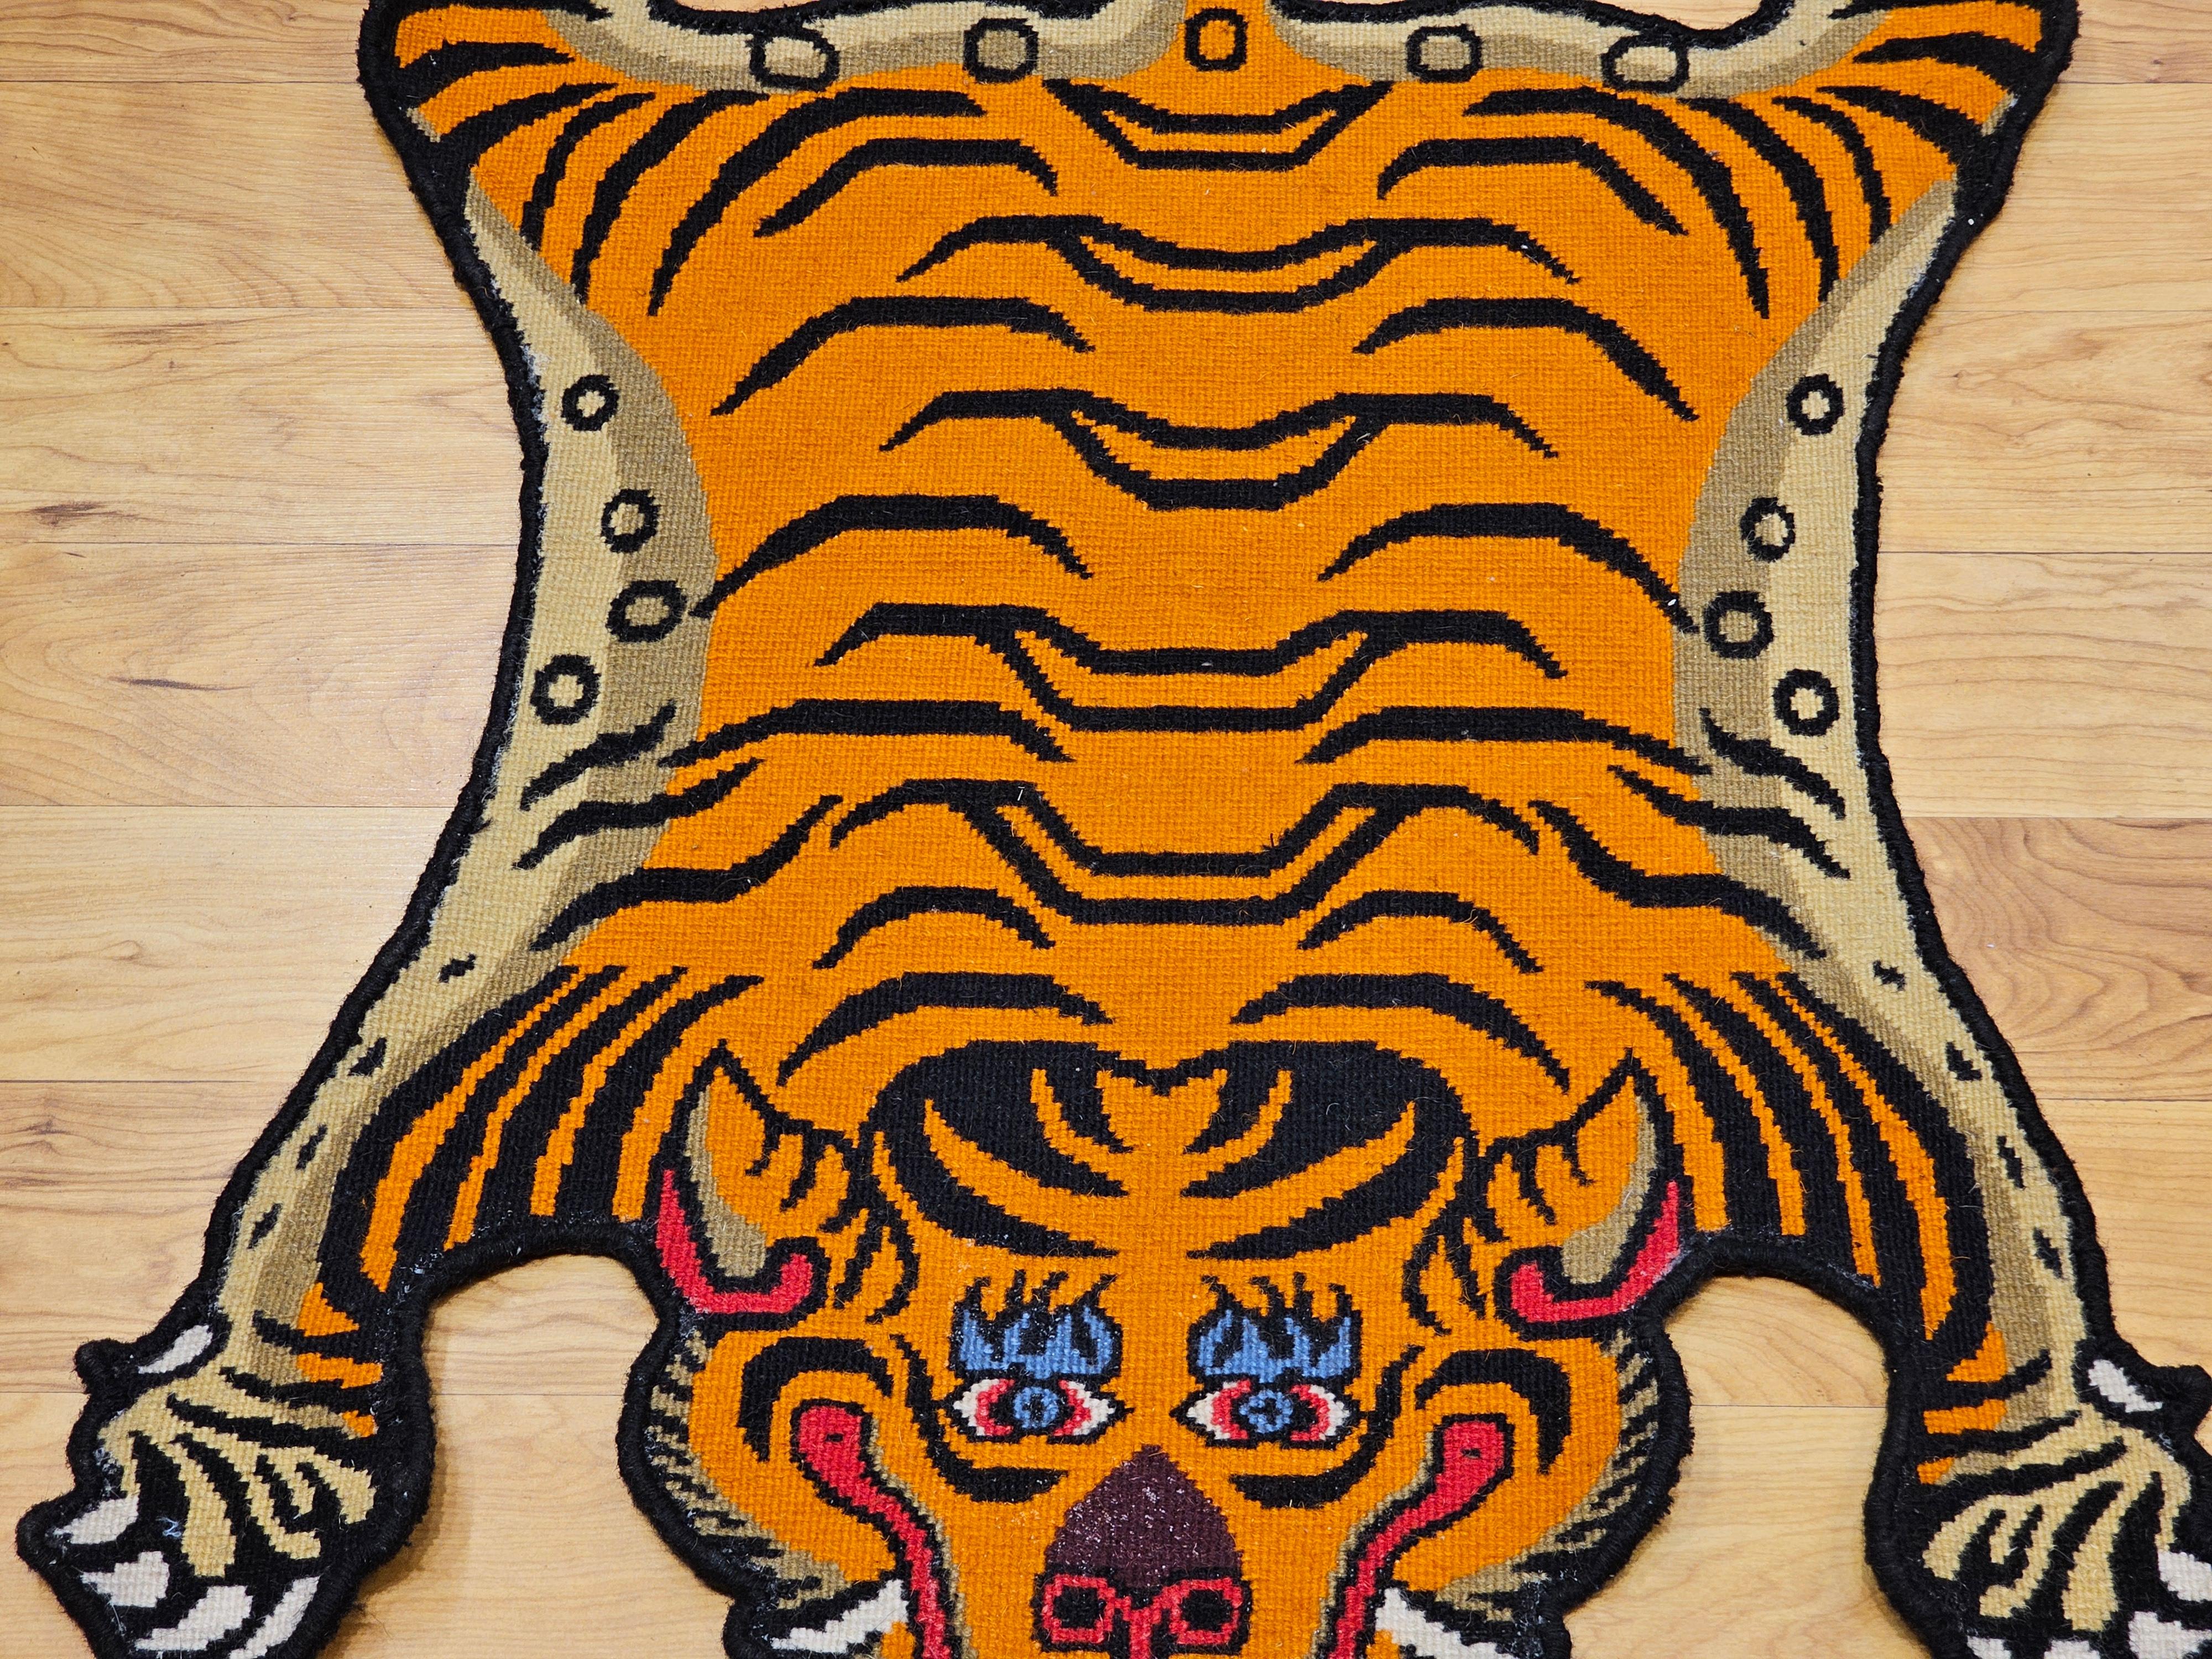 Vintage Tibetan rug in tiger shape in orange, black, red, and blue.  The rug is made in the shape of tiger skin which lays flat on the floor.  The primary color is bright orange with black markings.  The rug can be used on the floor or as a wall